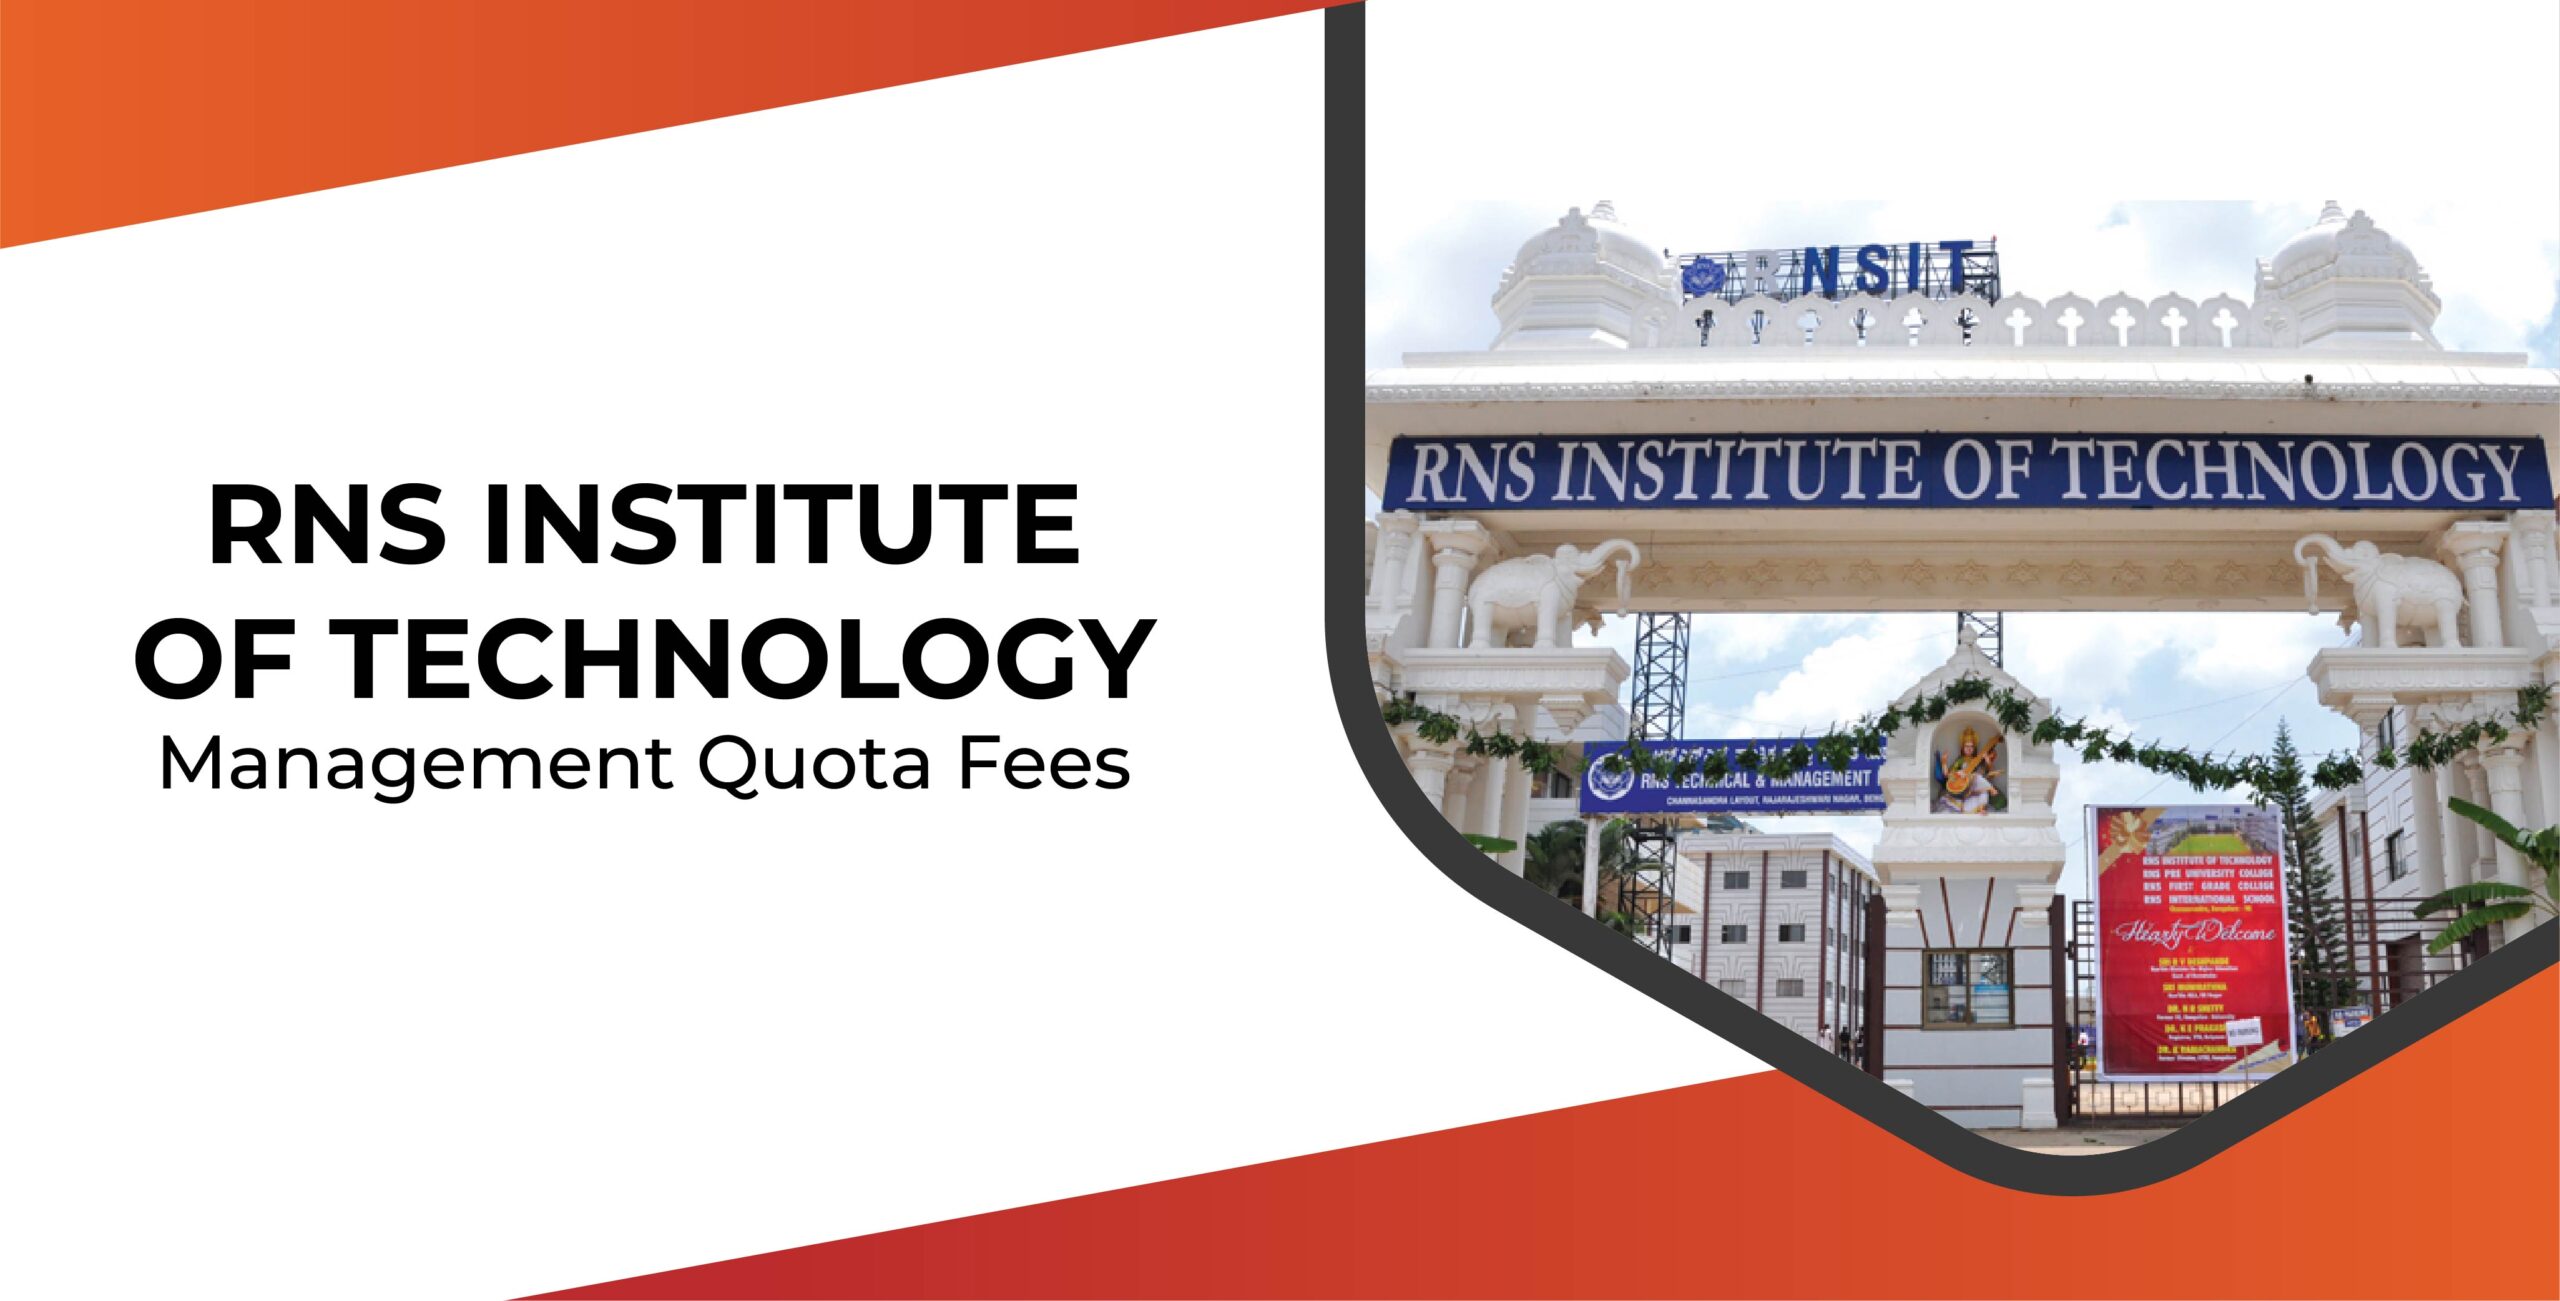 RNS Institute of Technology Management Quota Fees